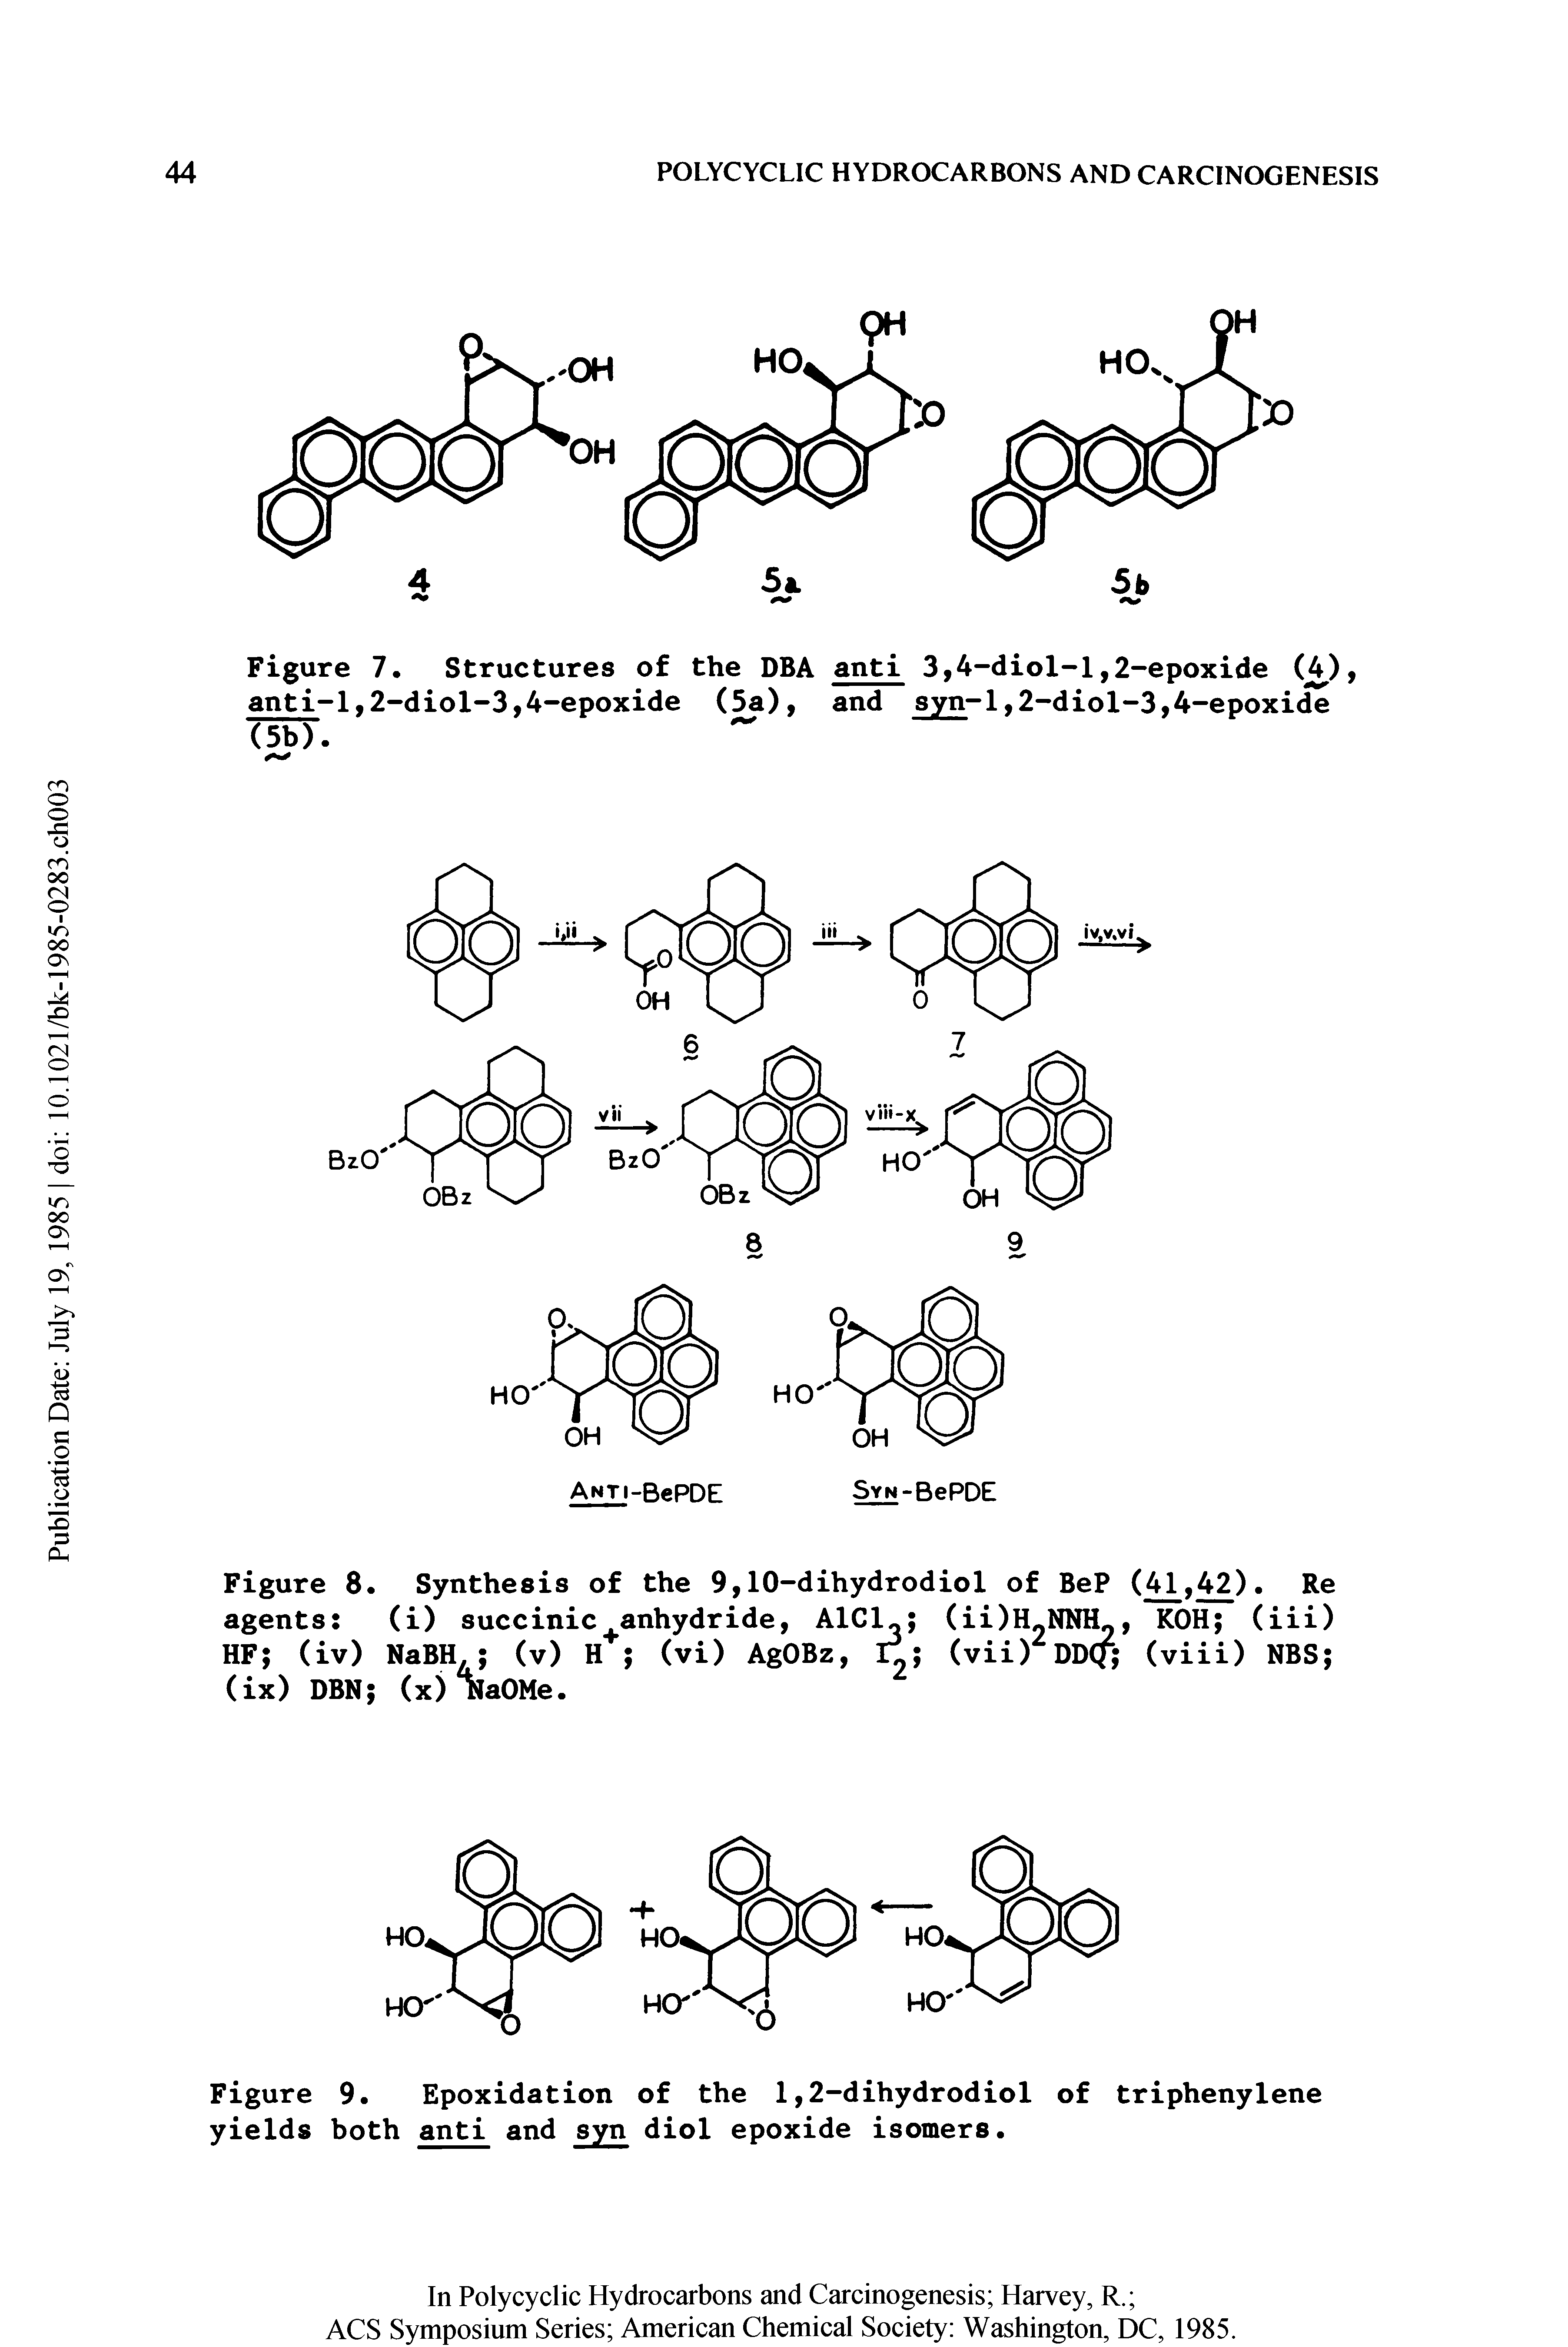 Figure 9. Epoxidation of the 1,2-dihydrodiol of triphenylene yields both anti and syn diol epoxide isomers.